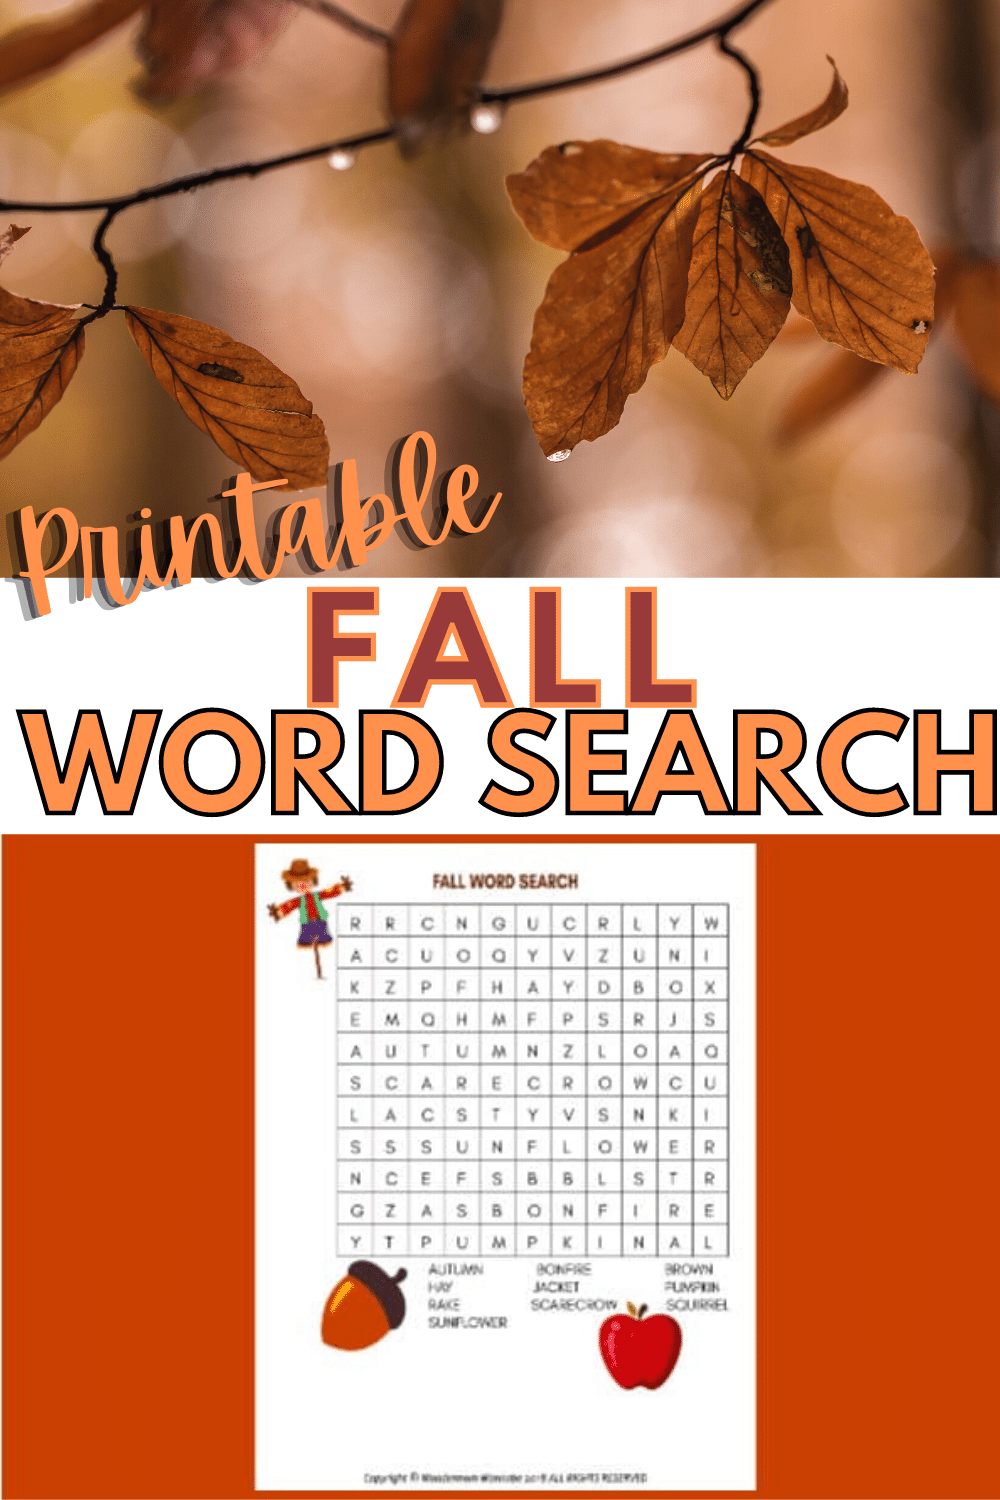 A printable fall word search is a great activity for kids. Full of fall-themed words this is a fun and educational kids printable for home or school. #fall #printables #wordsearch via @wondermomwannab